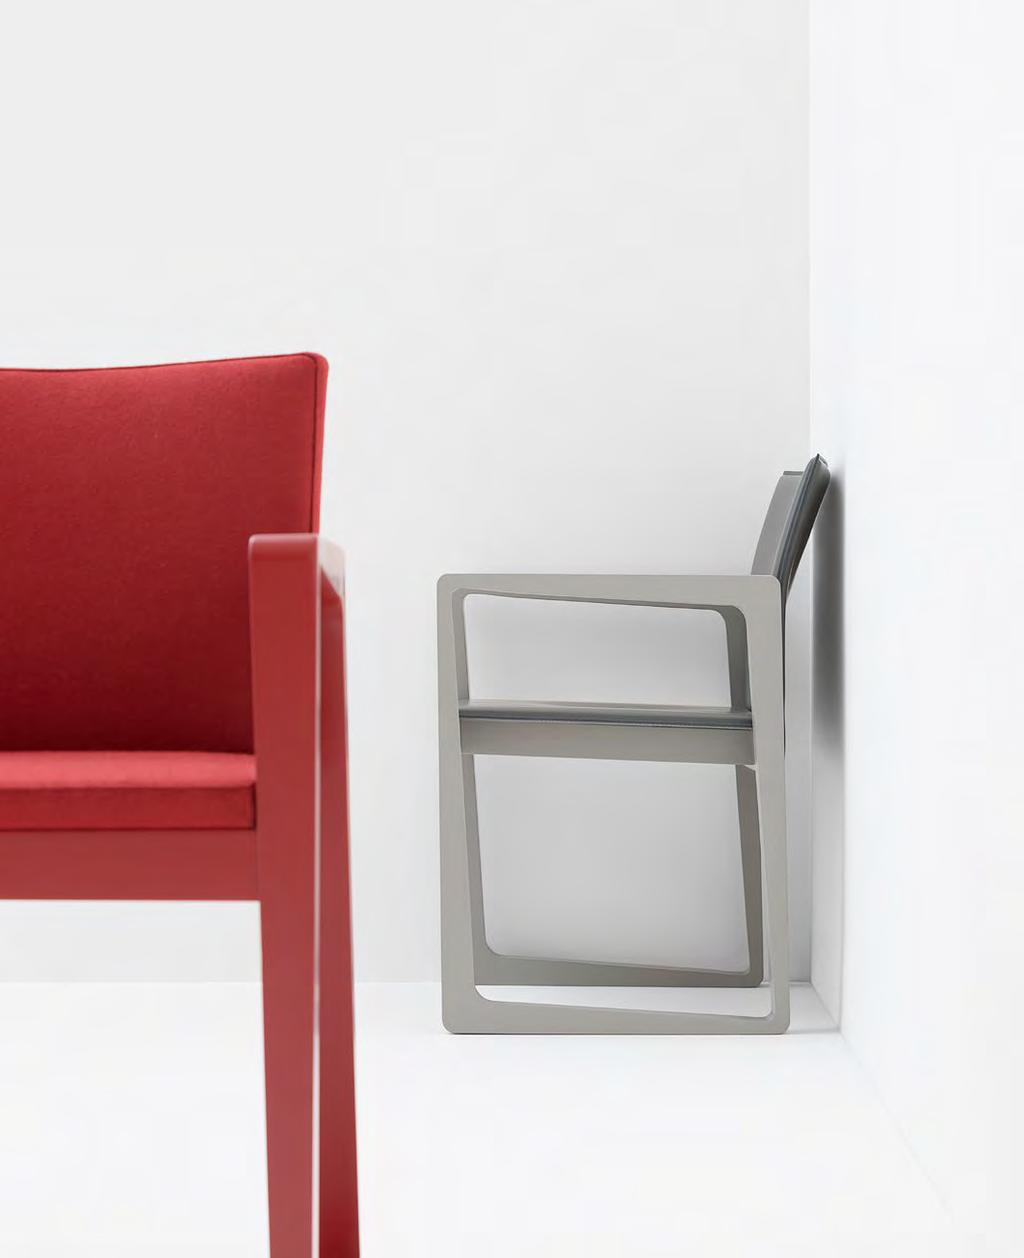 Askew LIGHT A lightweight slimline version extends the possible applications for Askew armchairs according to various